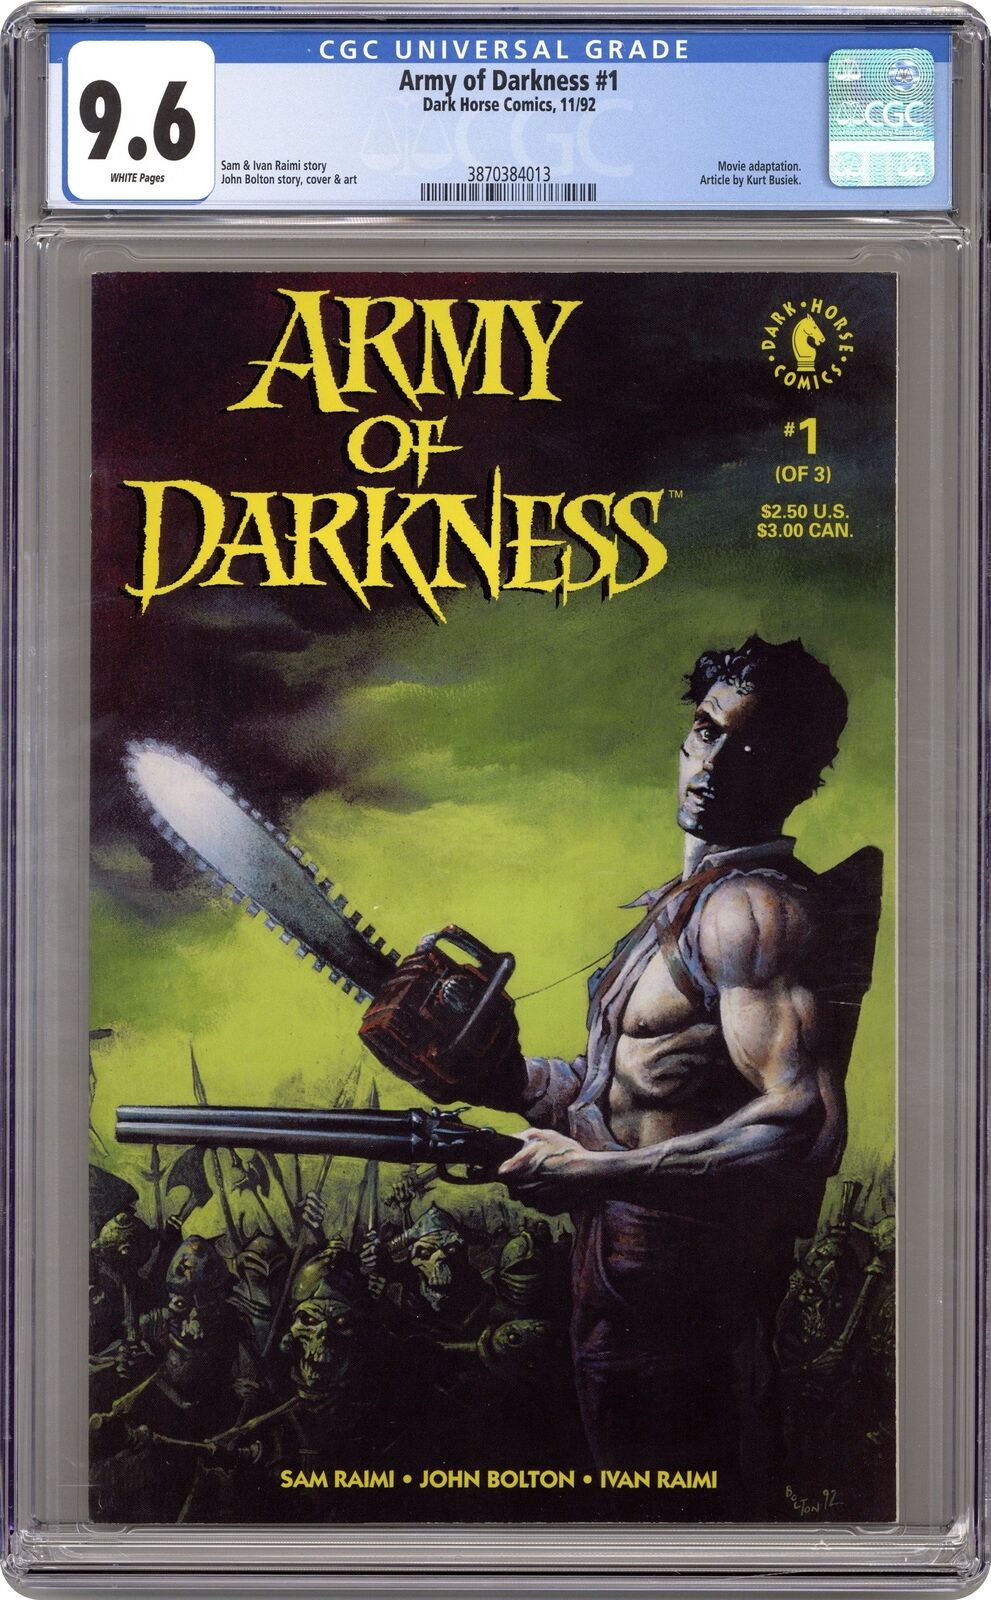 Army of Darkness #1 CGC 9.6 1992 3870384013